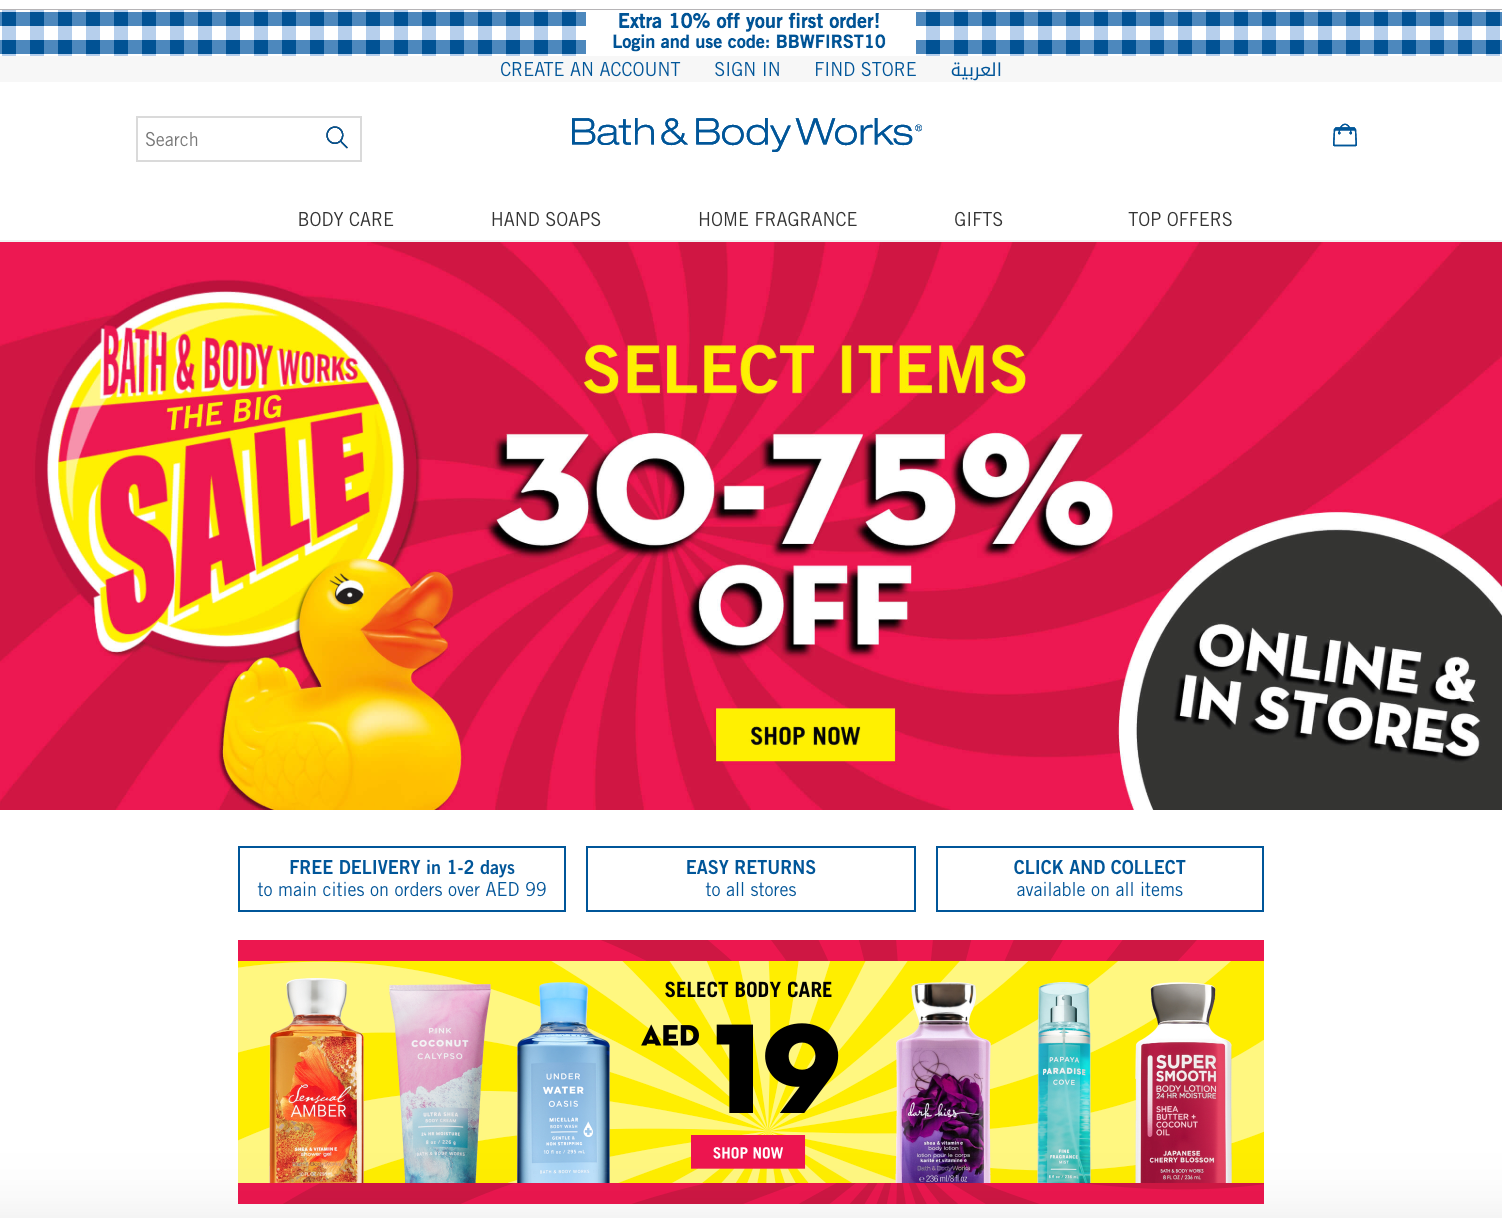 bath and body works website